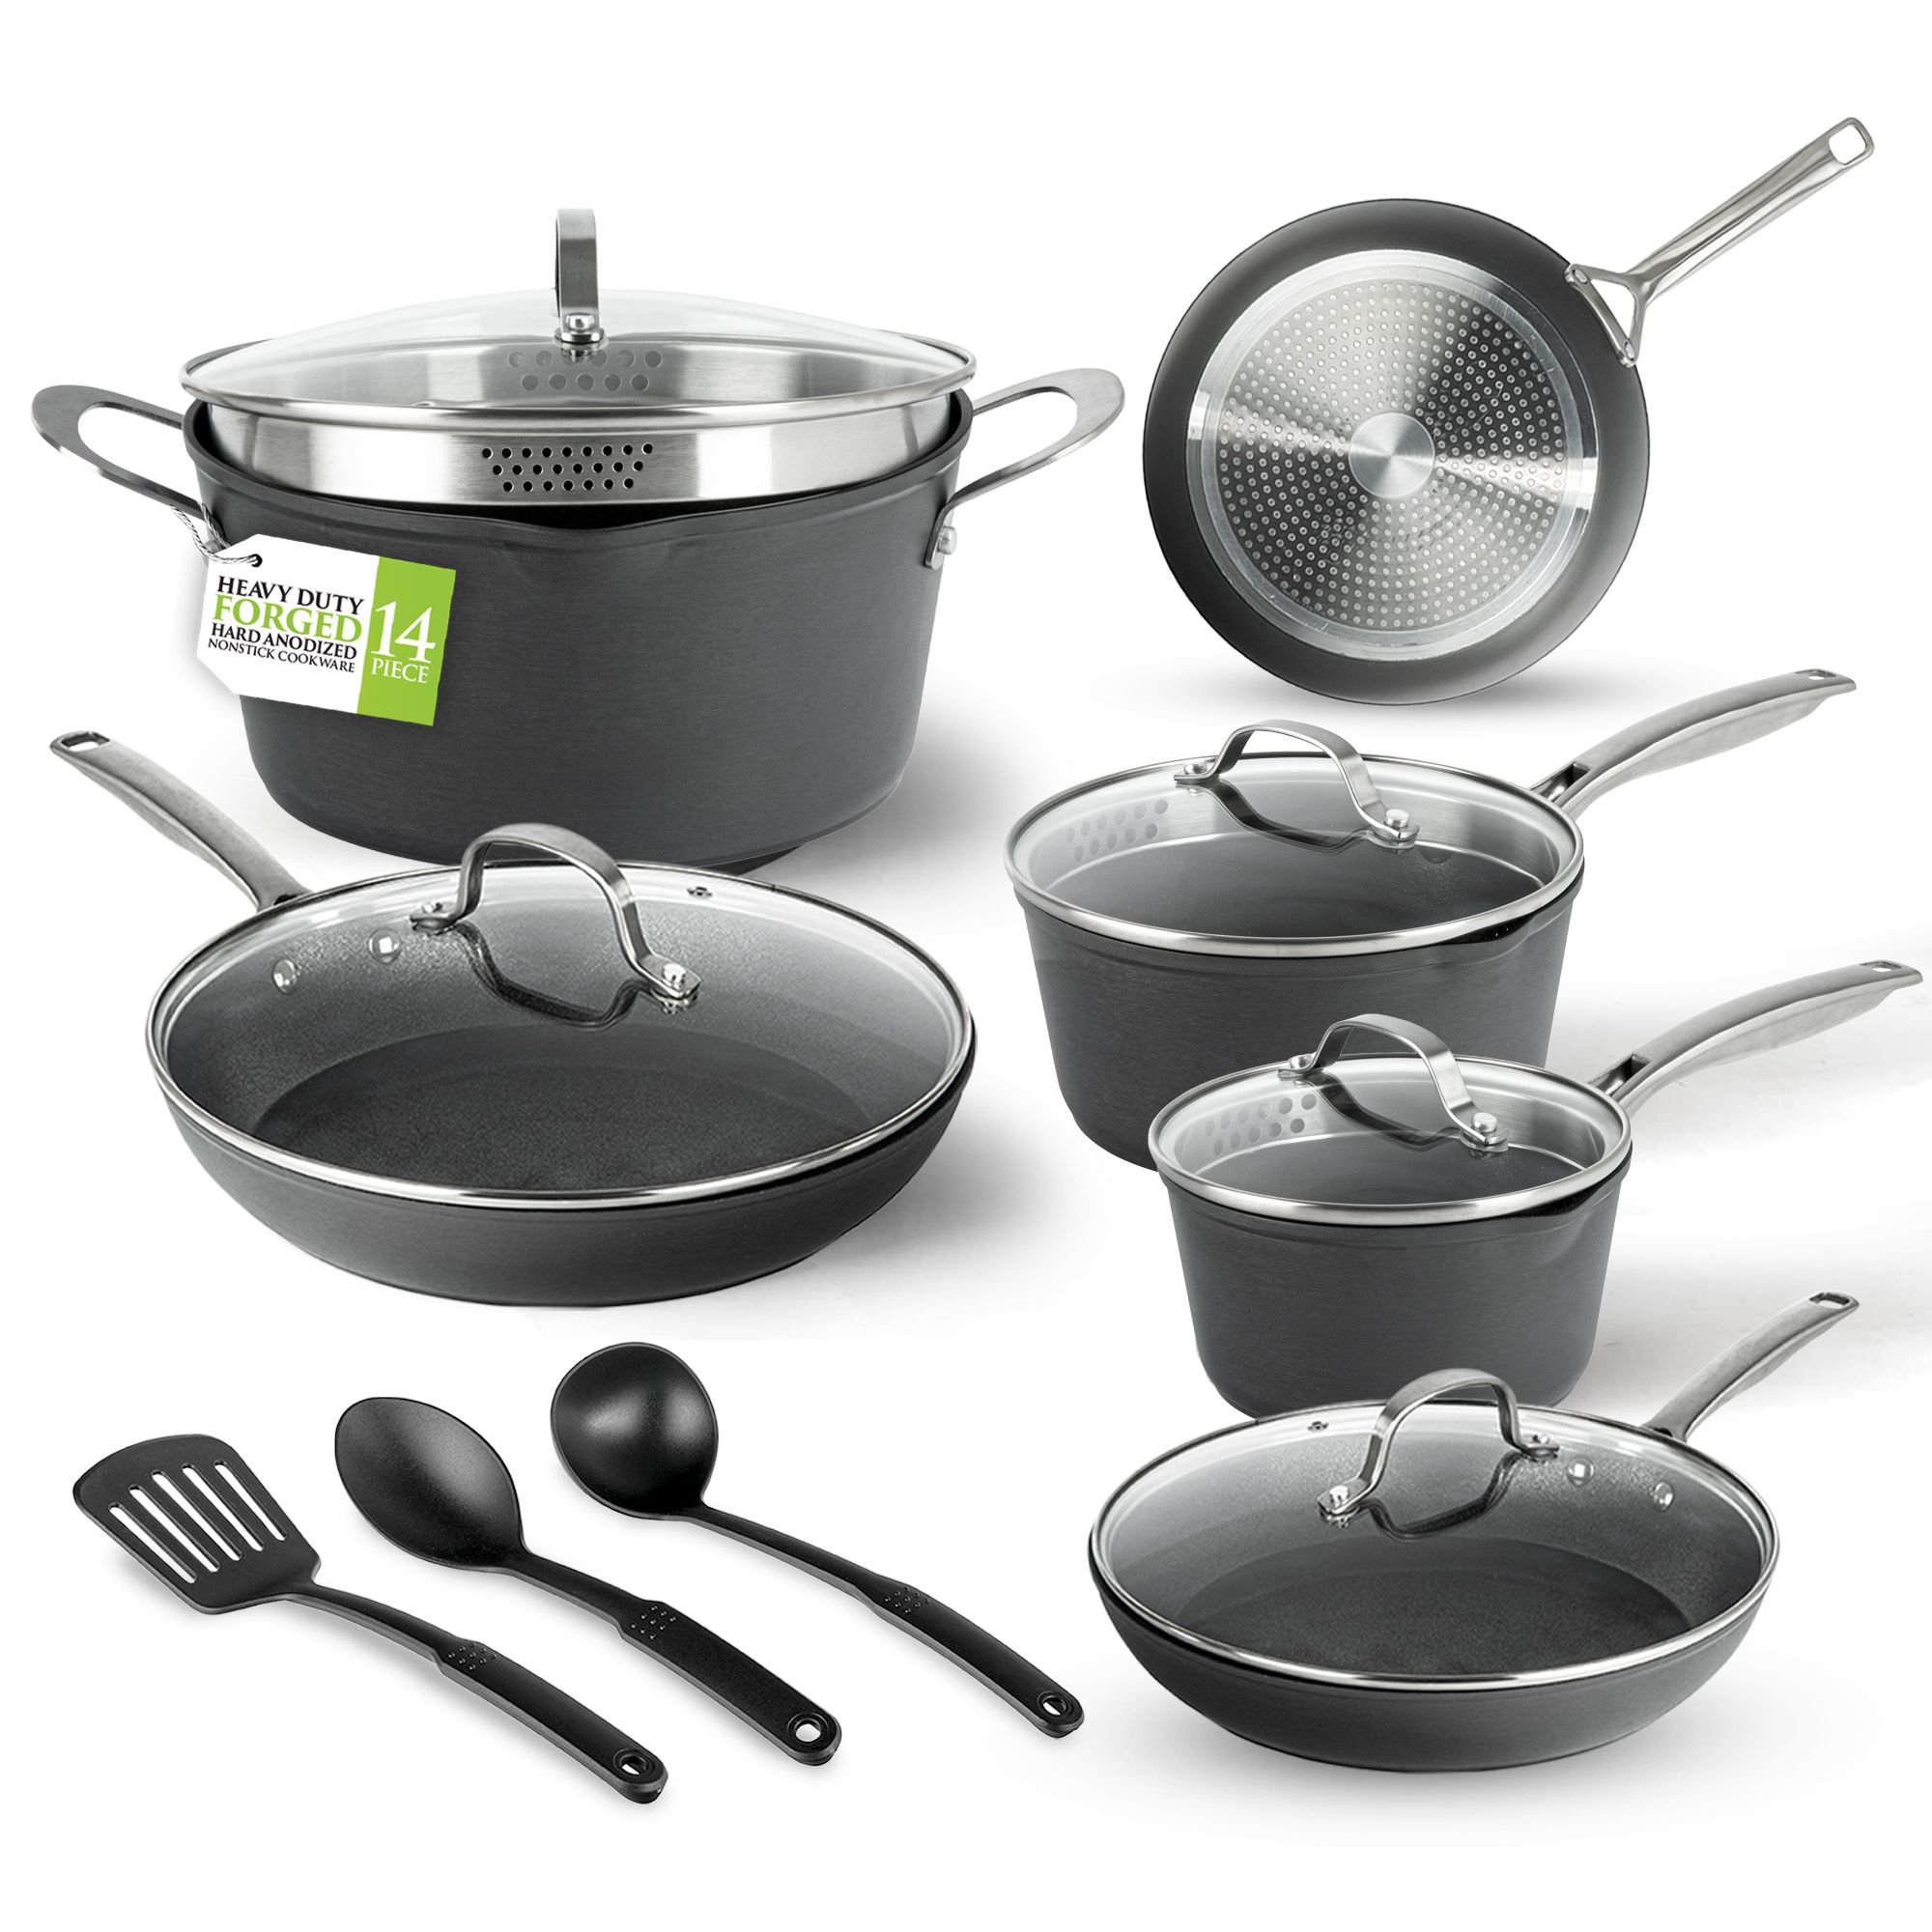 Granitestone Armor Max 14 Piece Hard Anodized Nonstick Durable Cookware  Set, Stay Cool Handles, Oven & Dishwasher Safe & Reviews